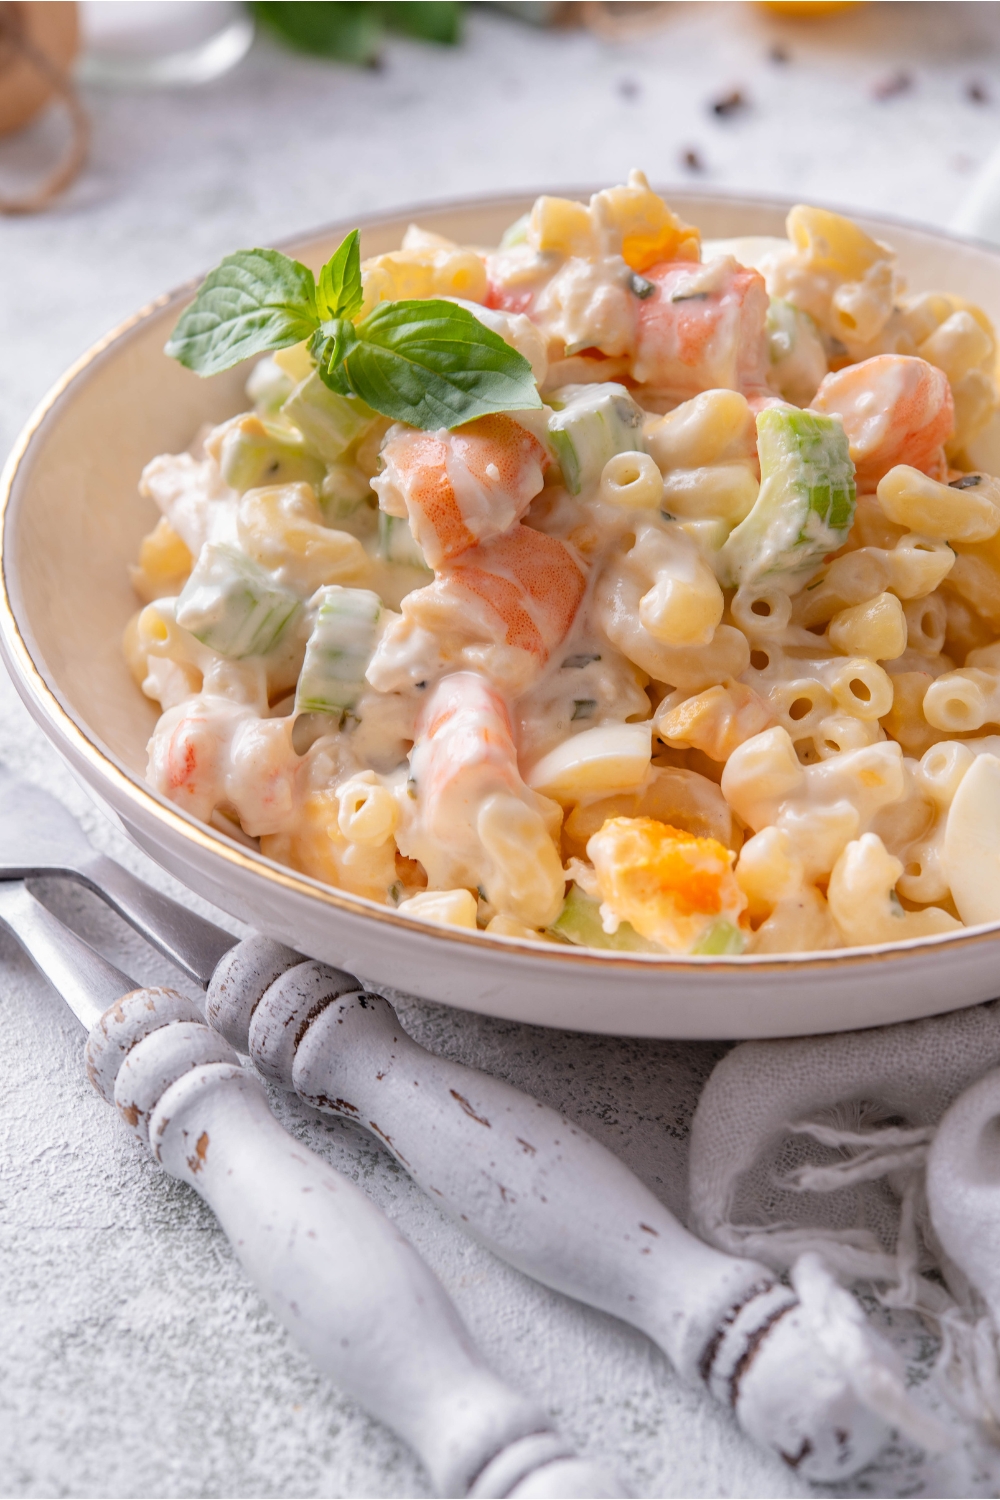 A bowl of seafood pasta salad with macaroni noodles, creamy dressing, and chunks of celery, hard-boiled eggs, and shrimp. The pasta salad is garnished with basil and two forks are next to the bowl.